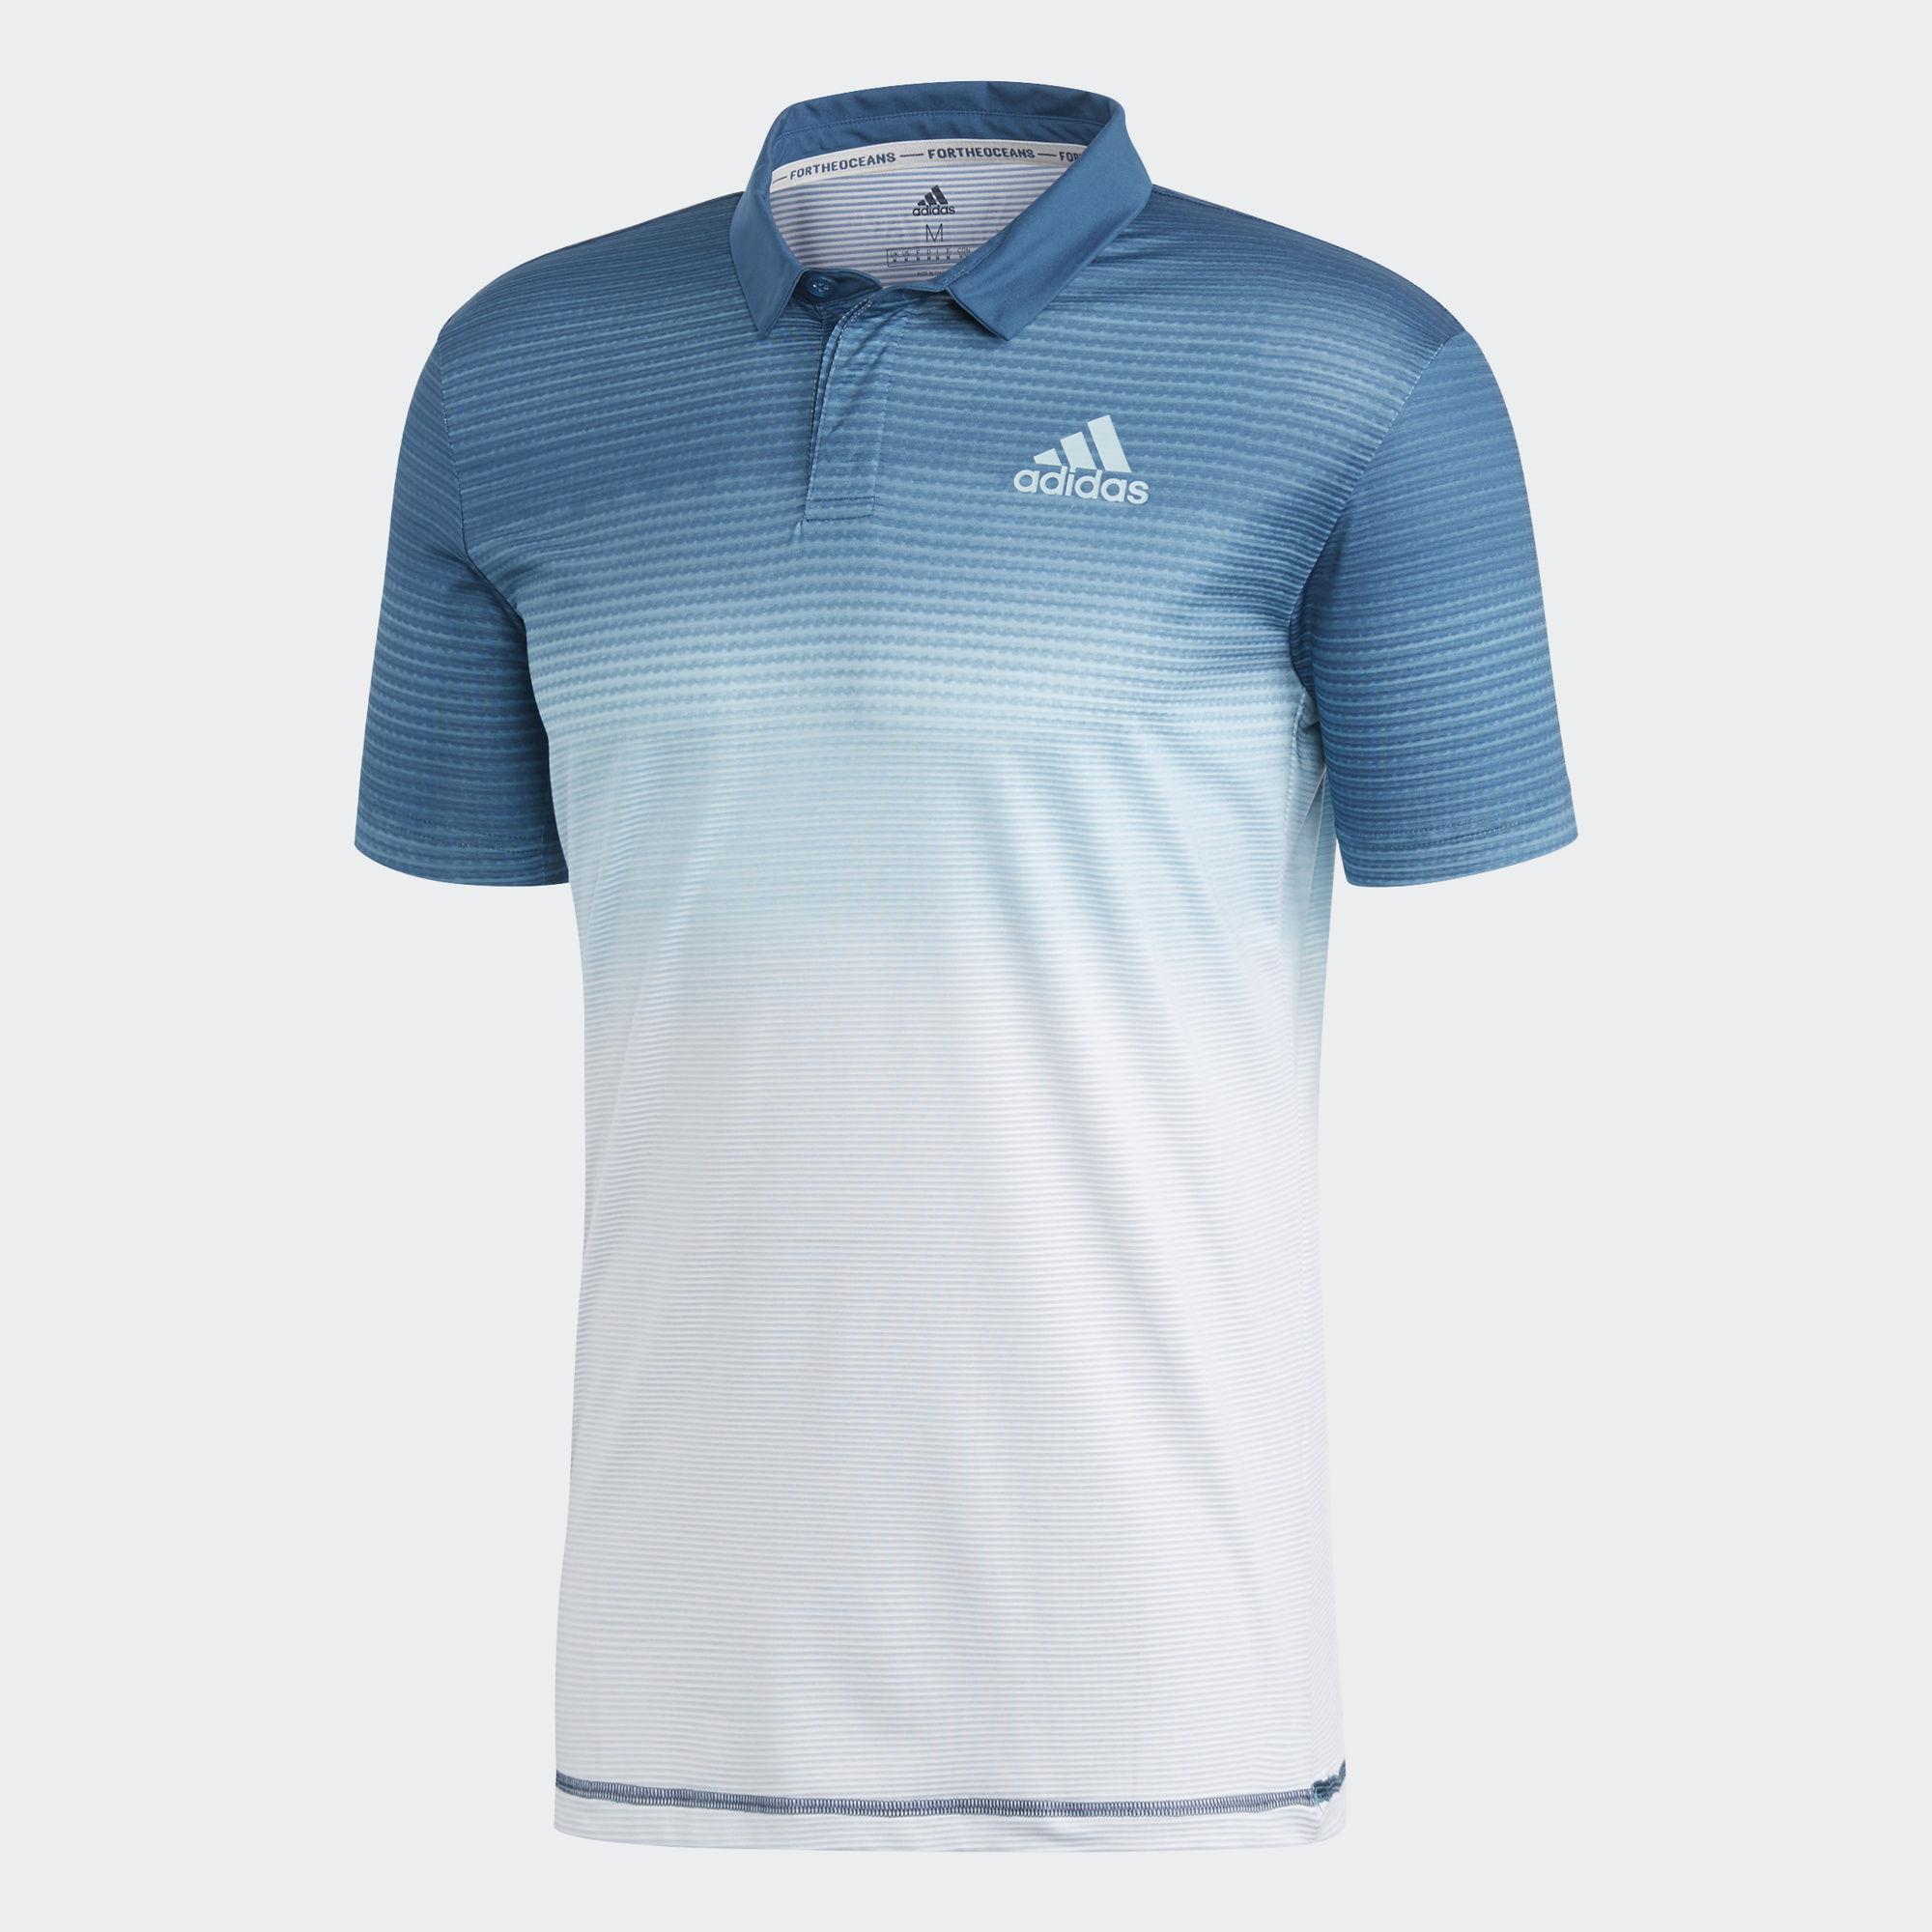 Buy > adidas slim fit polo > in stock